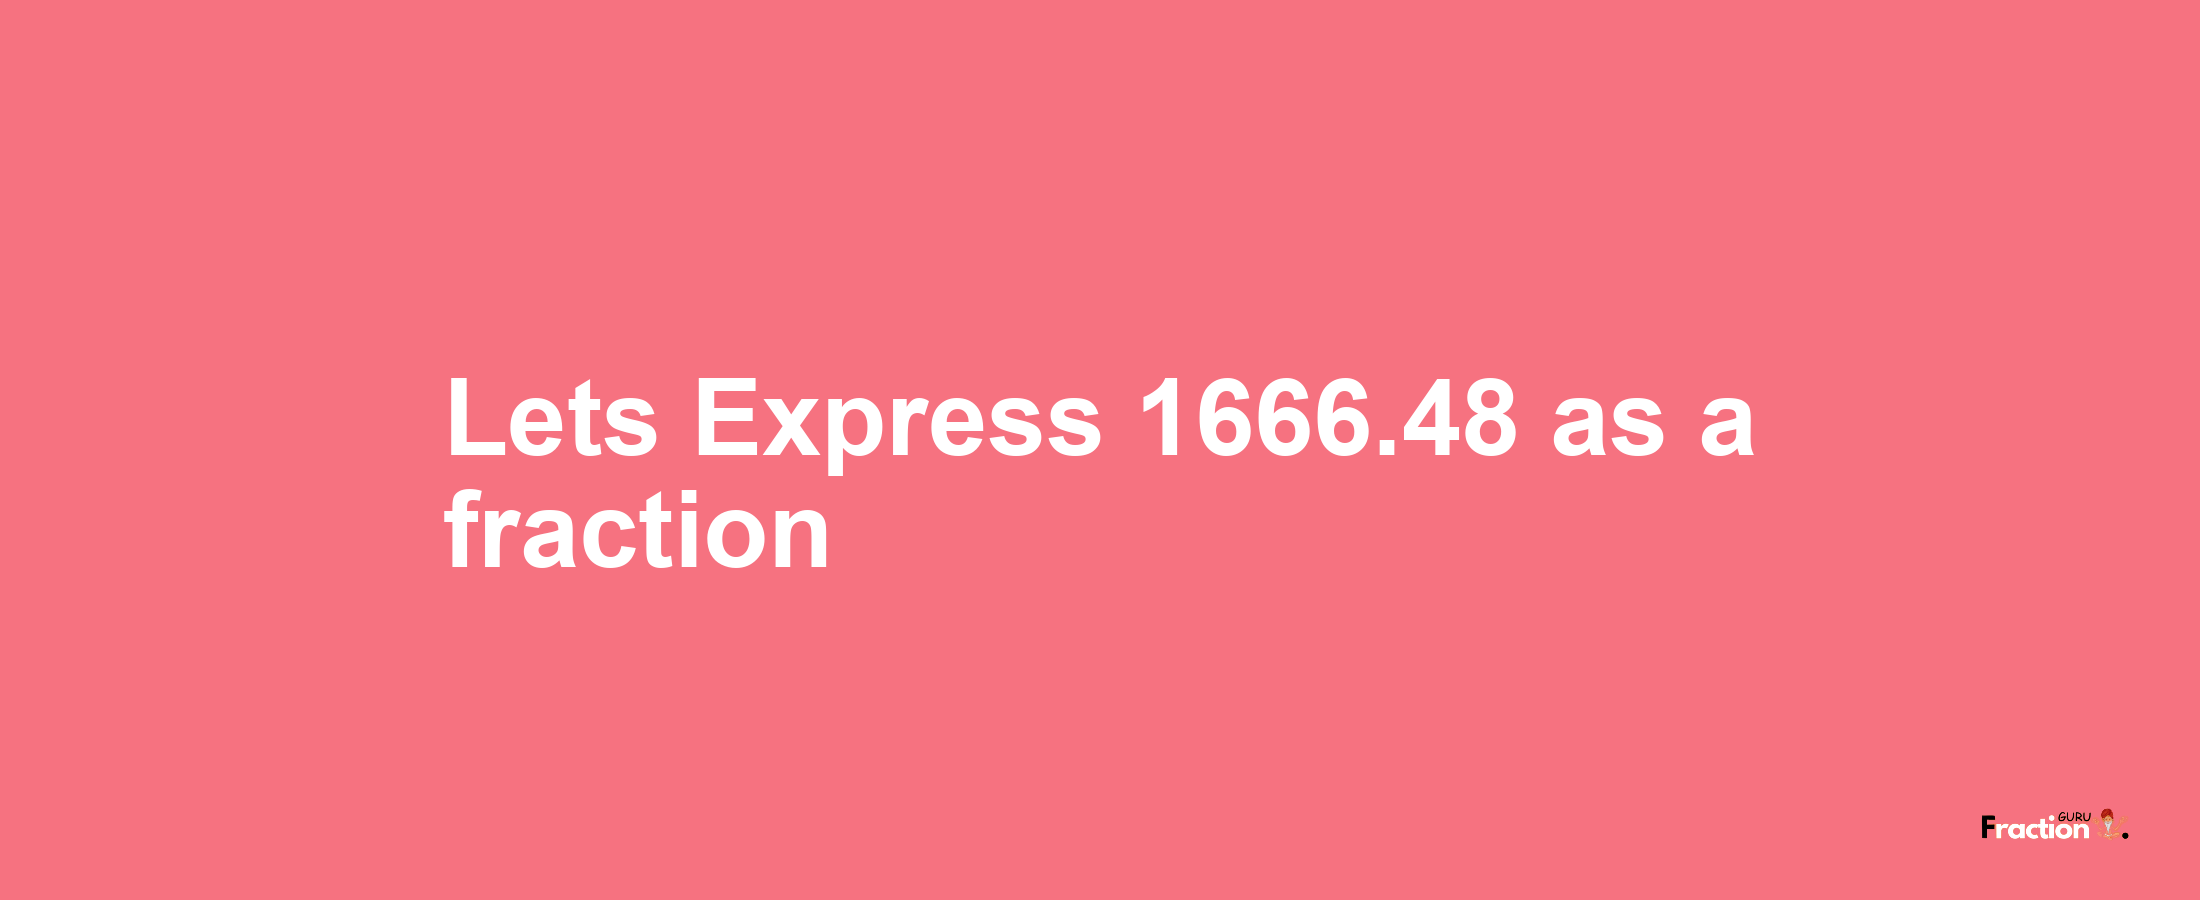 Lets Express 1666.48 as afraction